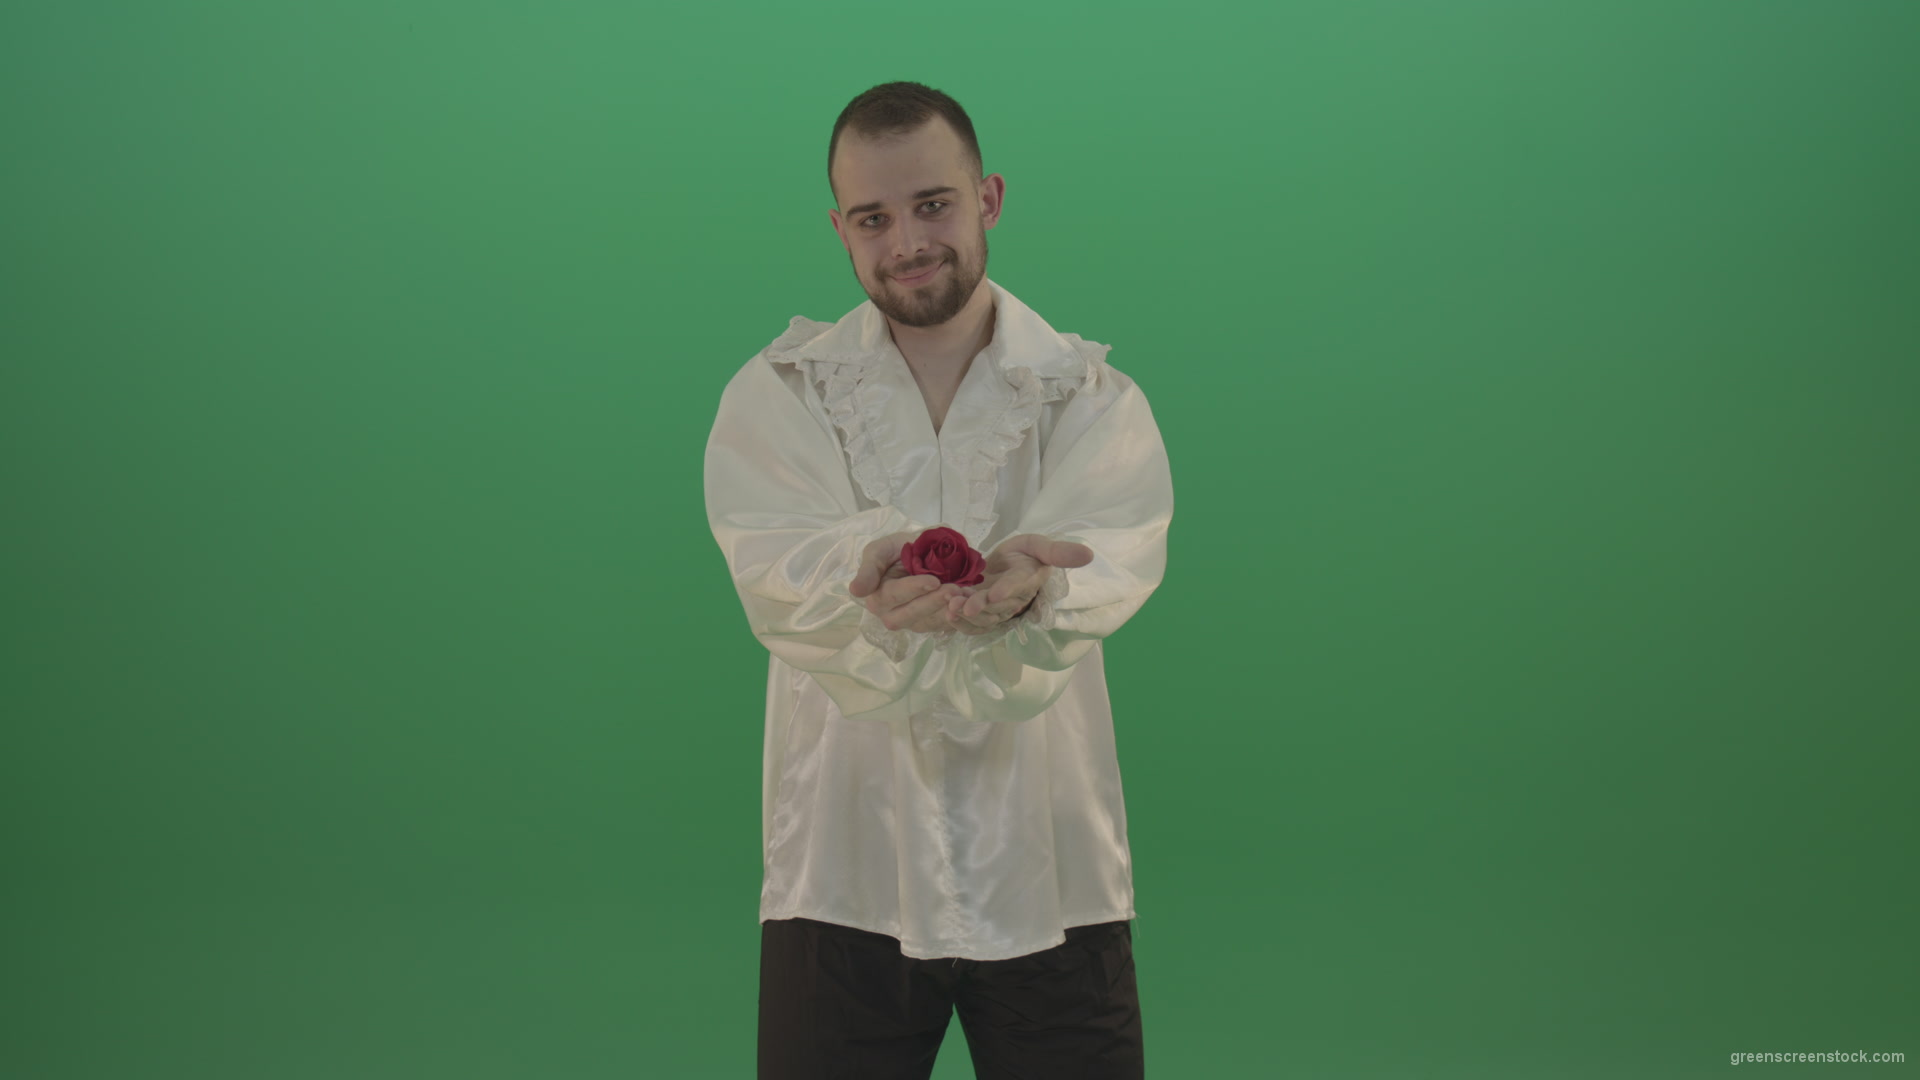 Boy-gives-flower-squeezing-in-the-sleeves-elegantly-in-hand-isolated-on-green-screen_008 Green Screen Stock